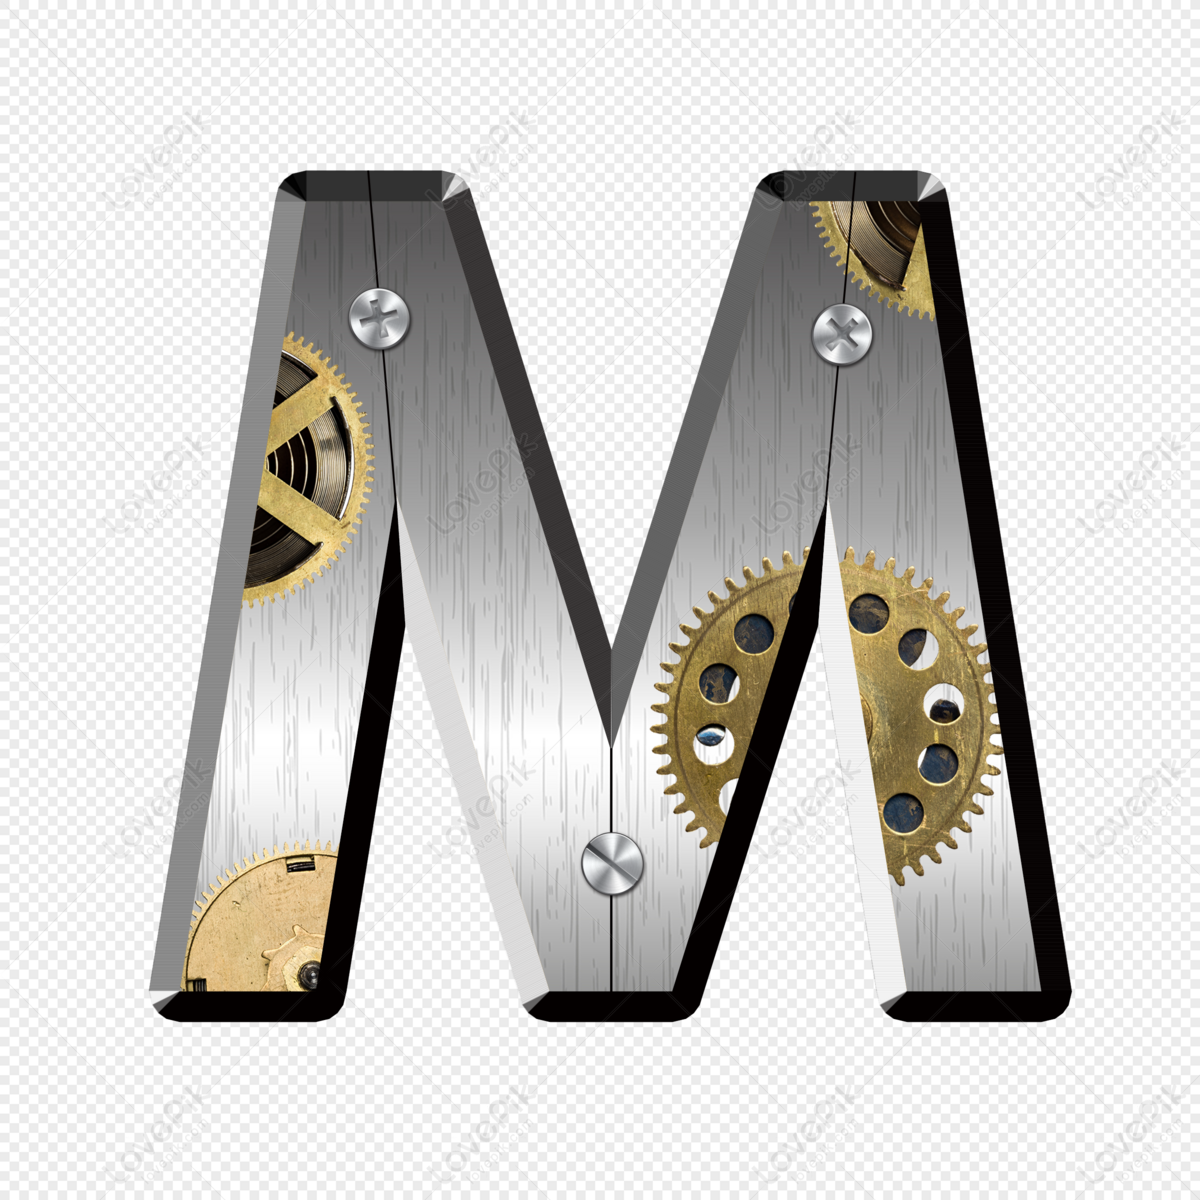 Metal Letter M Free PNG And Clipart Image For Free Download ...